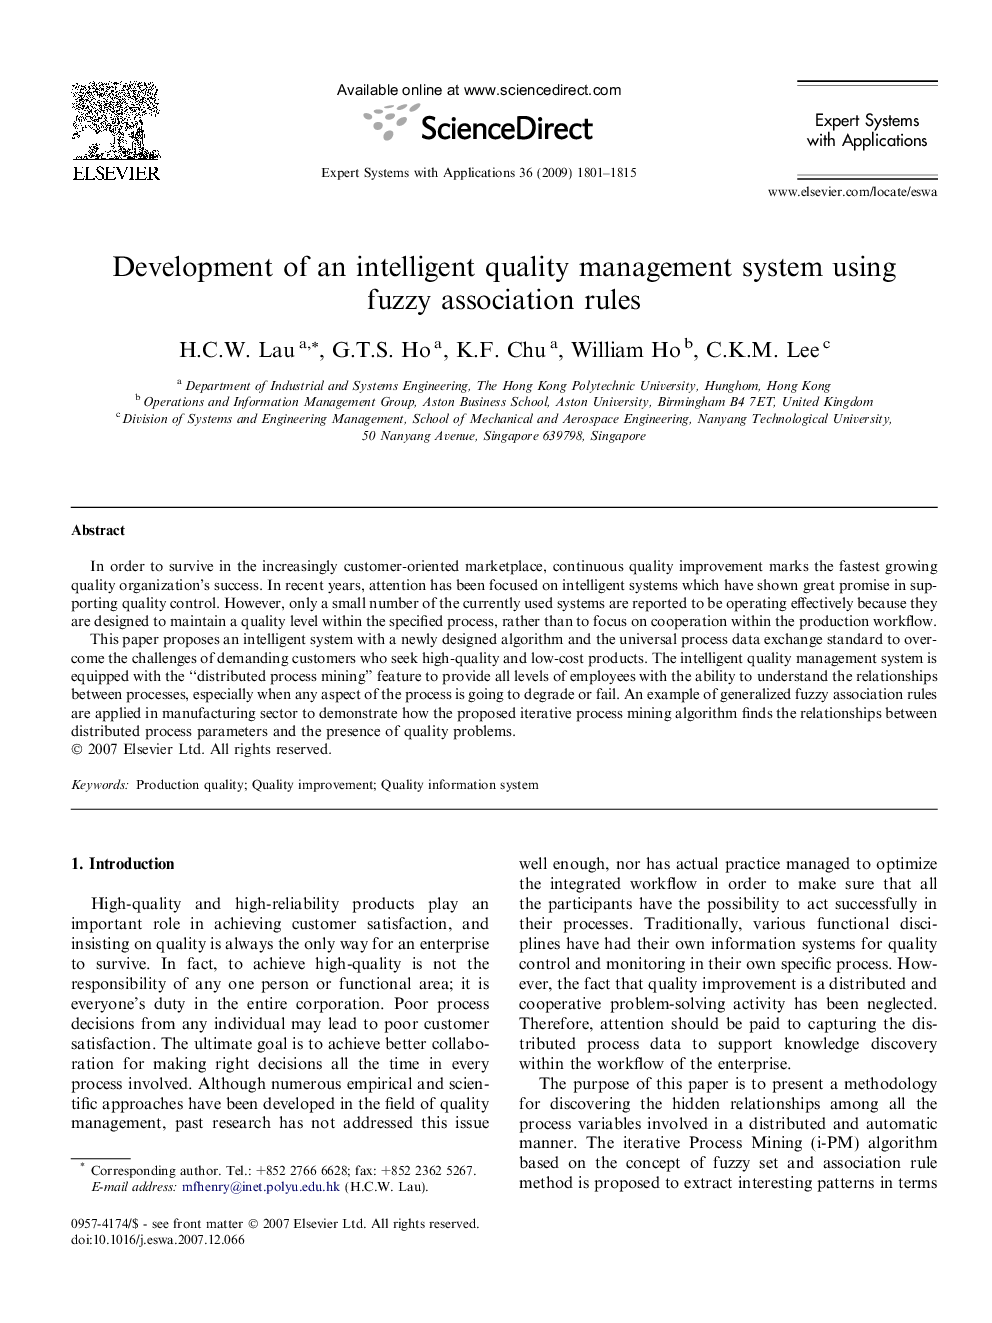 Development of an intelligent quality management system using fuzzy association rules